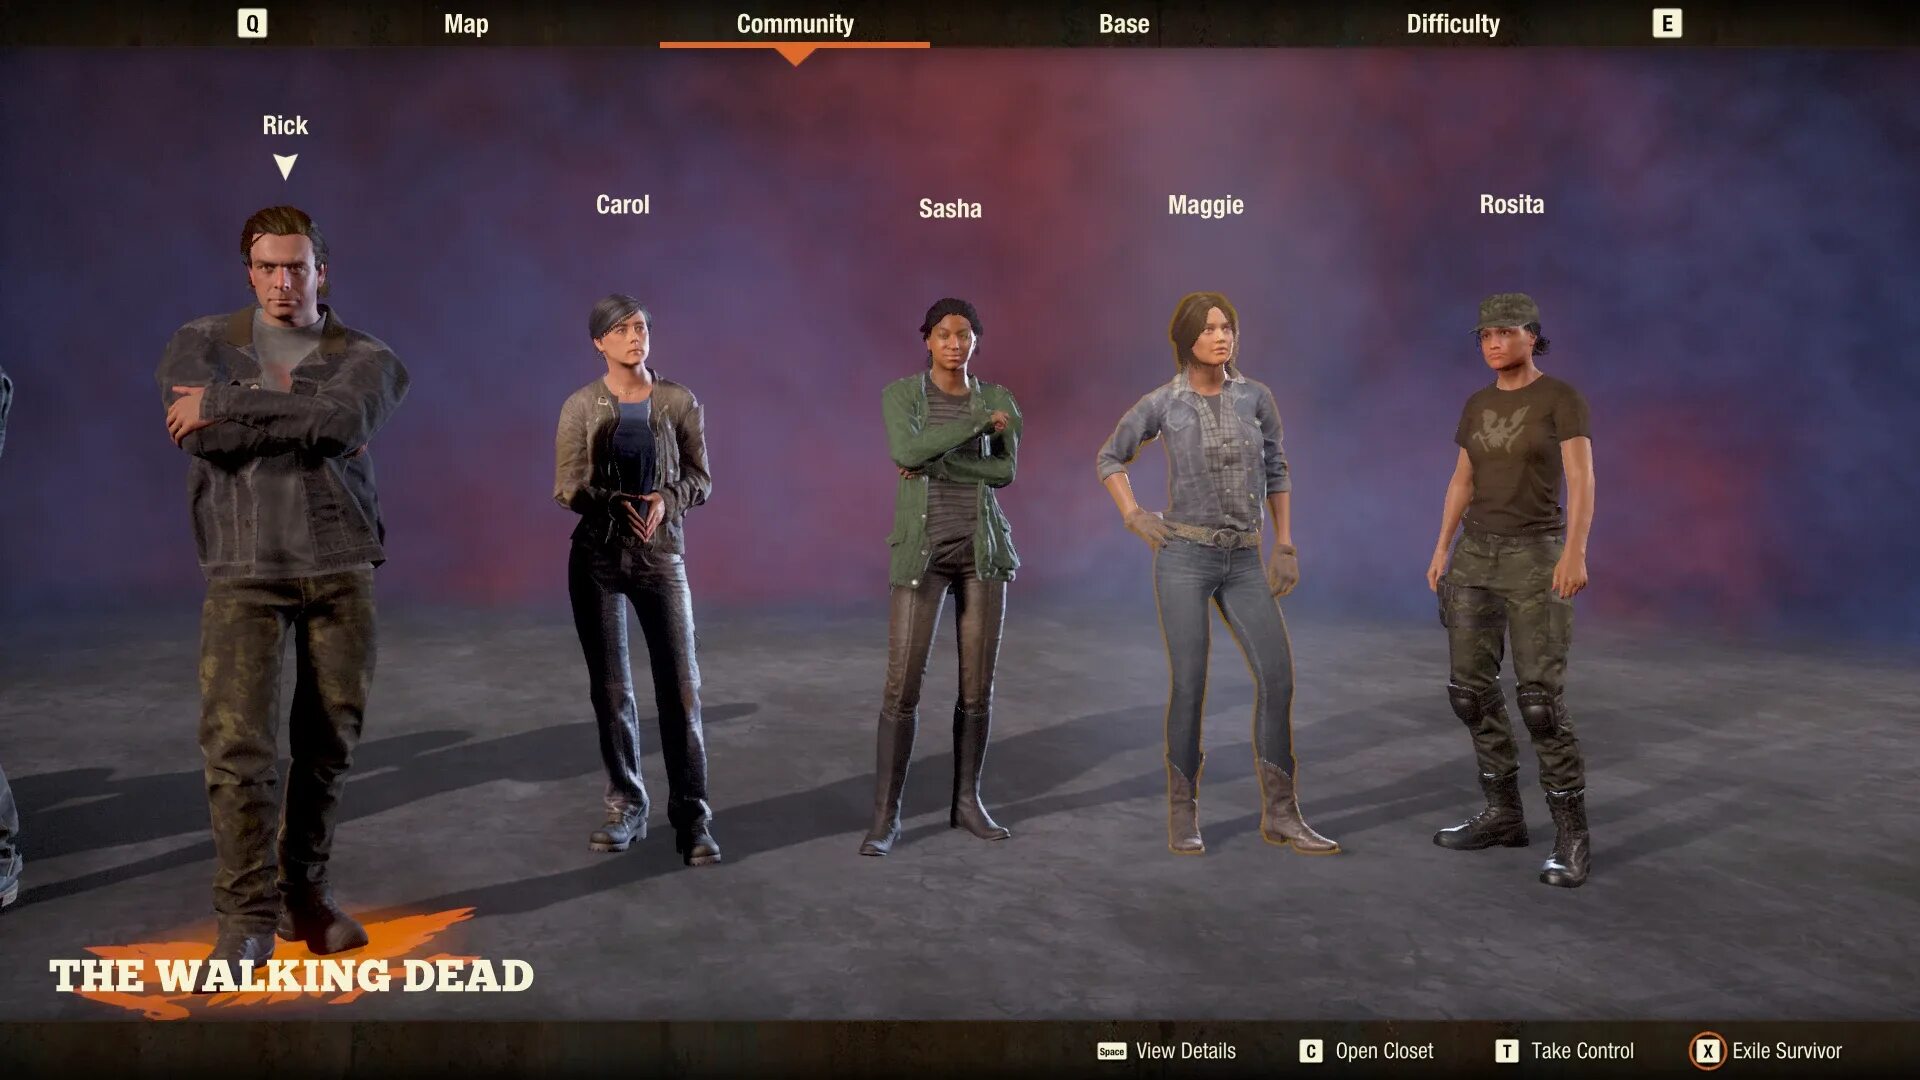 State of Decay мод Ходячие мертвецы. State of Decay 2 Рик Граймс. State of Decay 2 персонажи алого когтя. State of Decay 2 одежда жилетка. Cursed walking 1.19 2